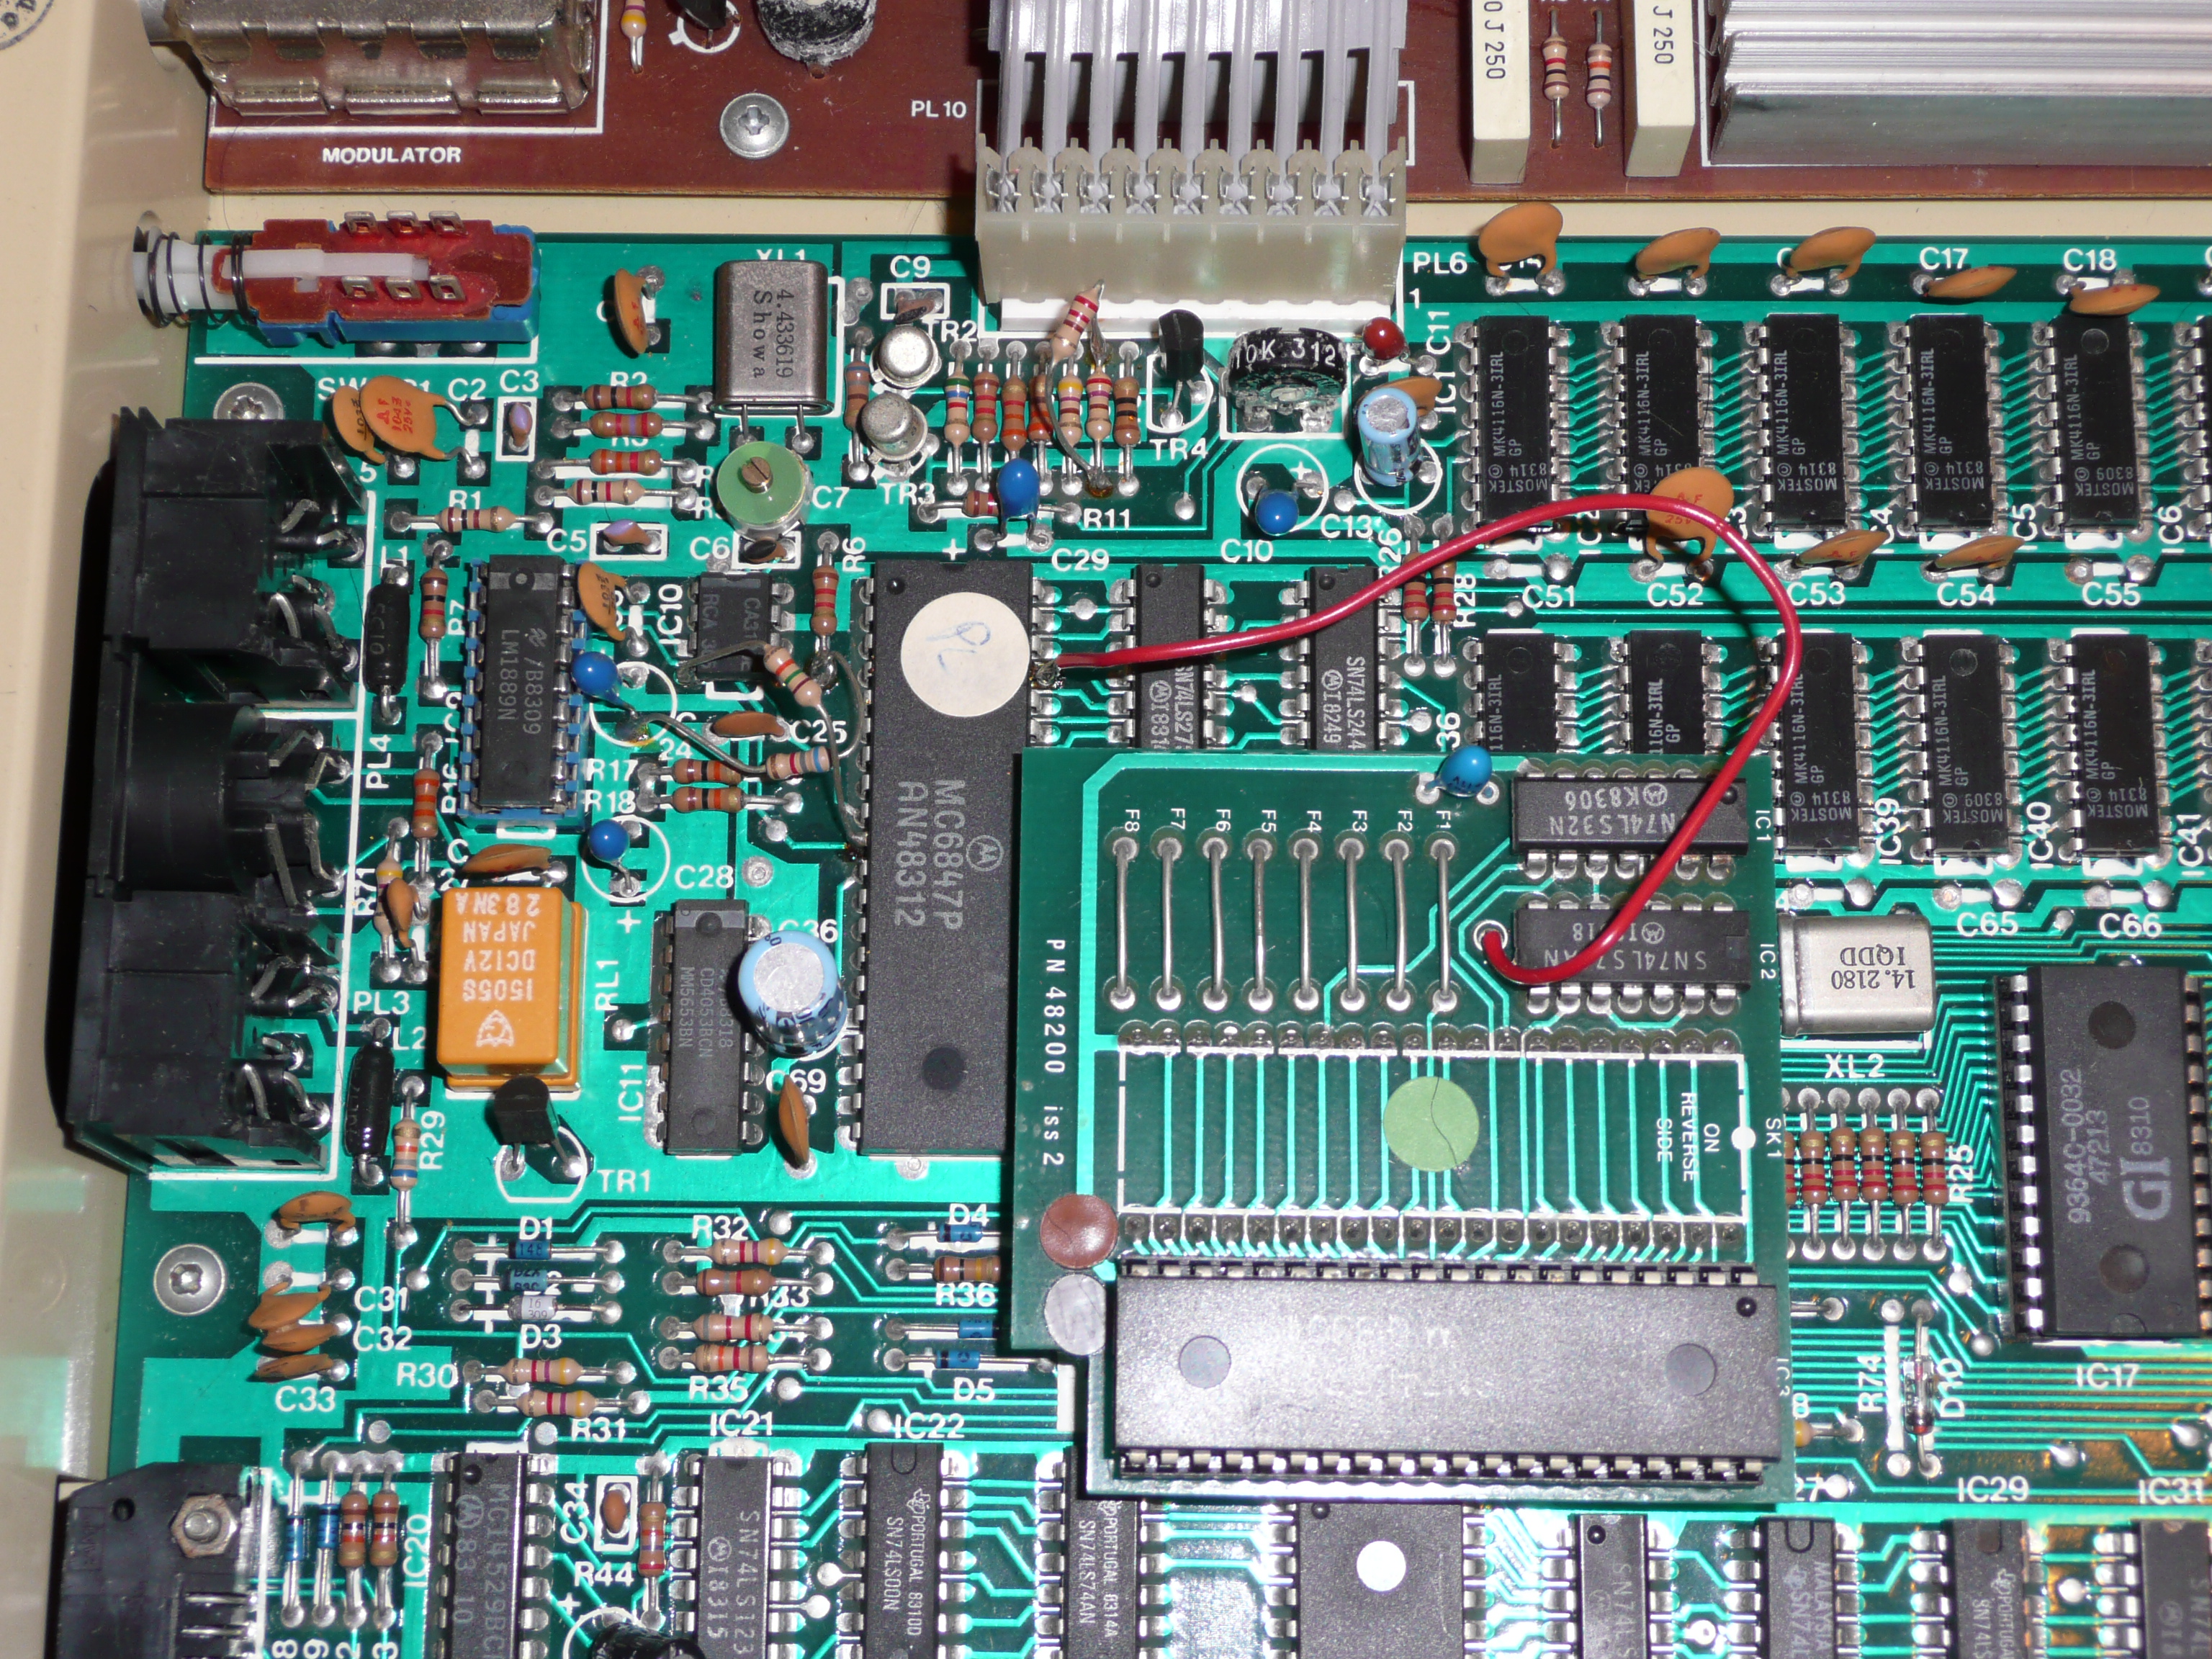 The daughterboard in its socket